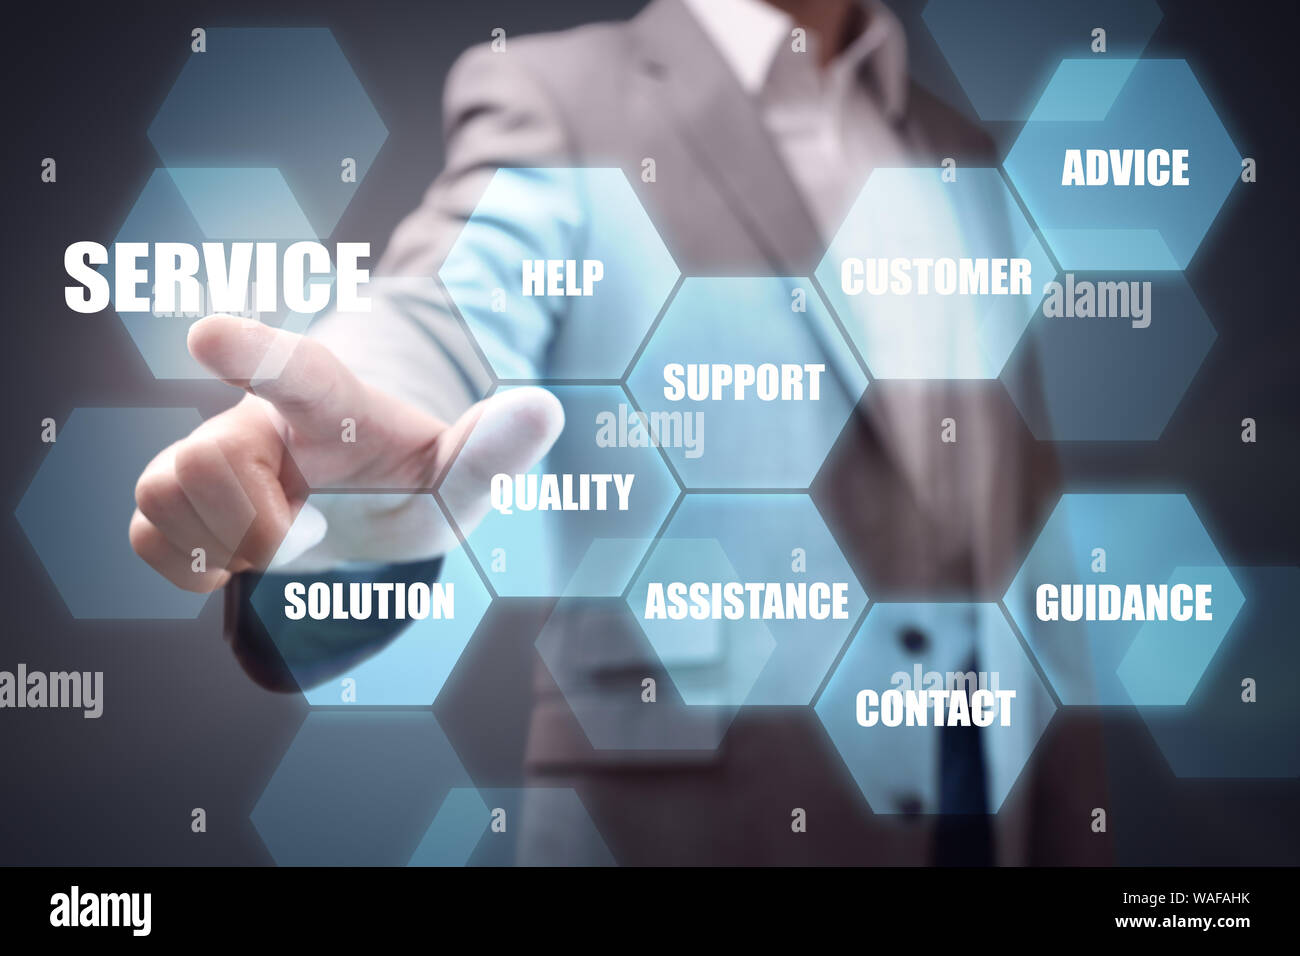 businessman hand pushing service button concept for help, contact support and assistance Stock Photo